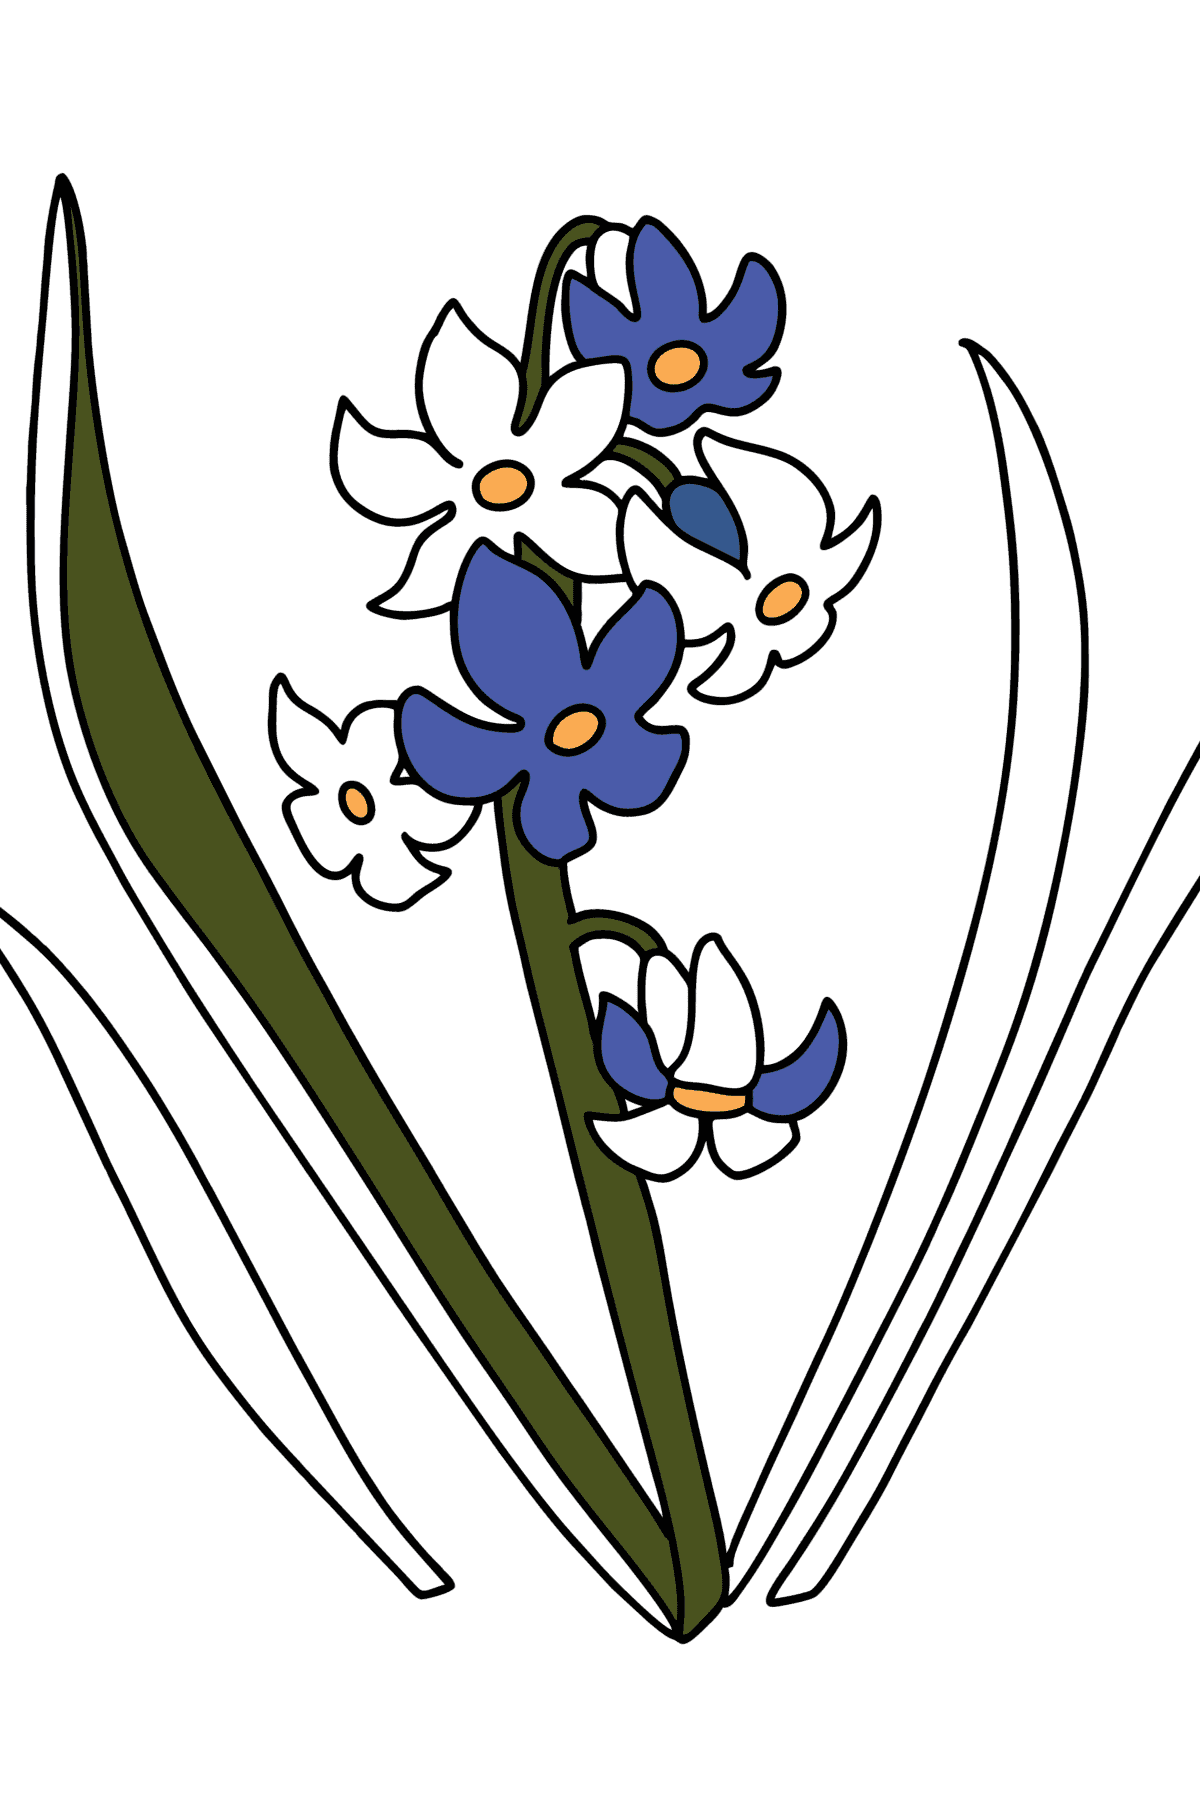 Hyacinth coloring page - Coloring Pages for Kids